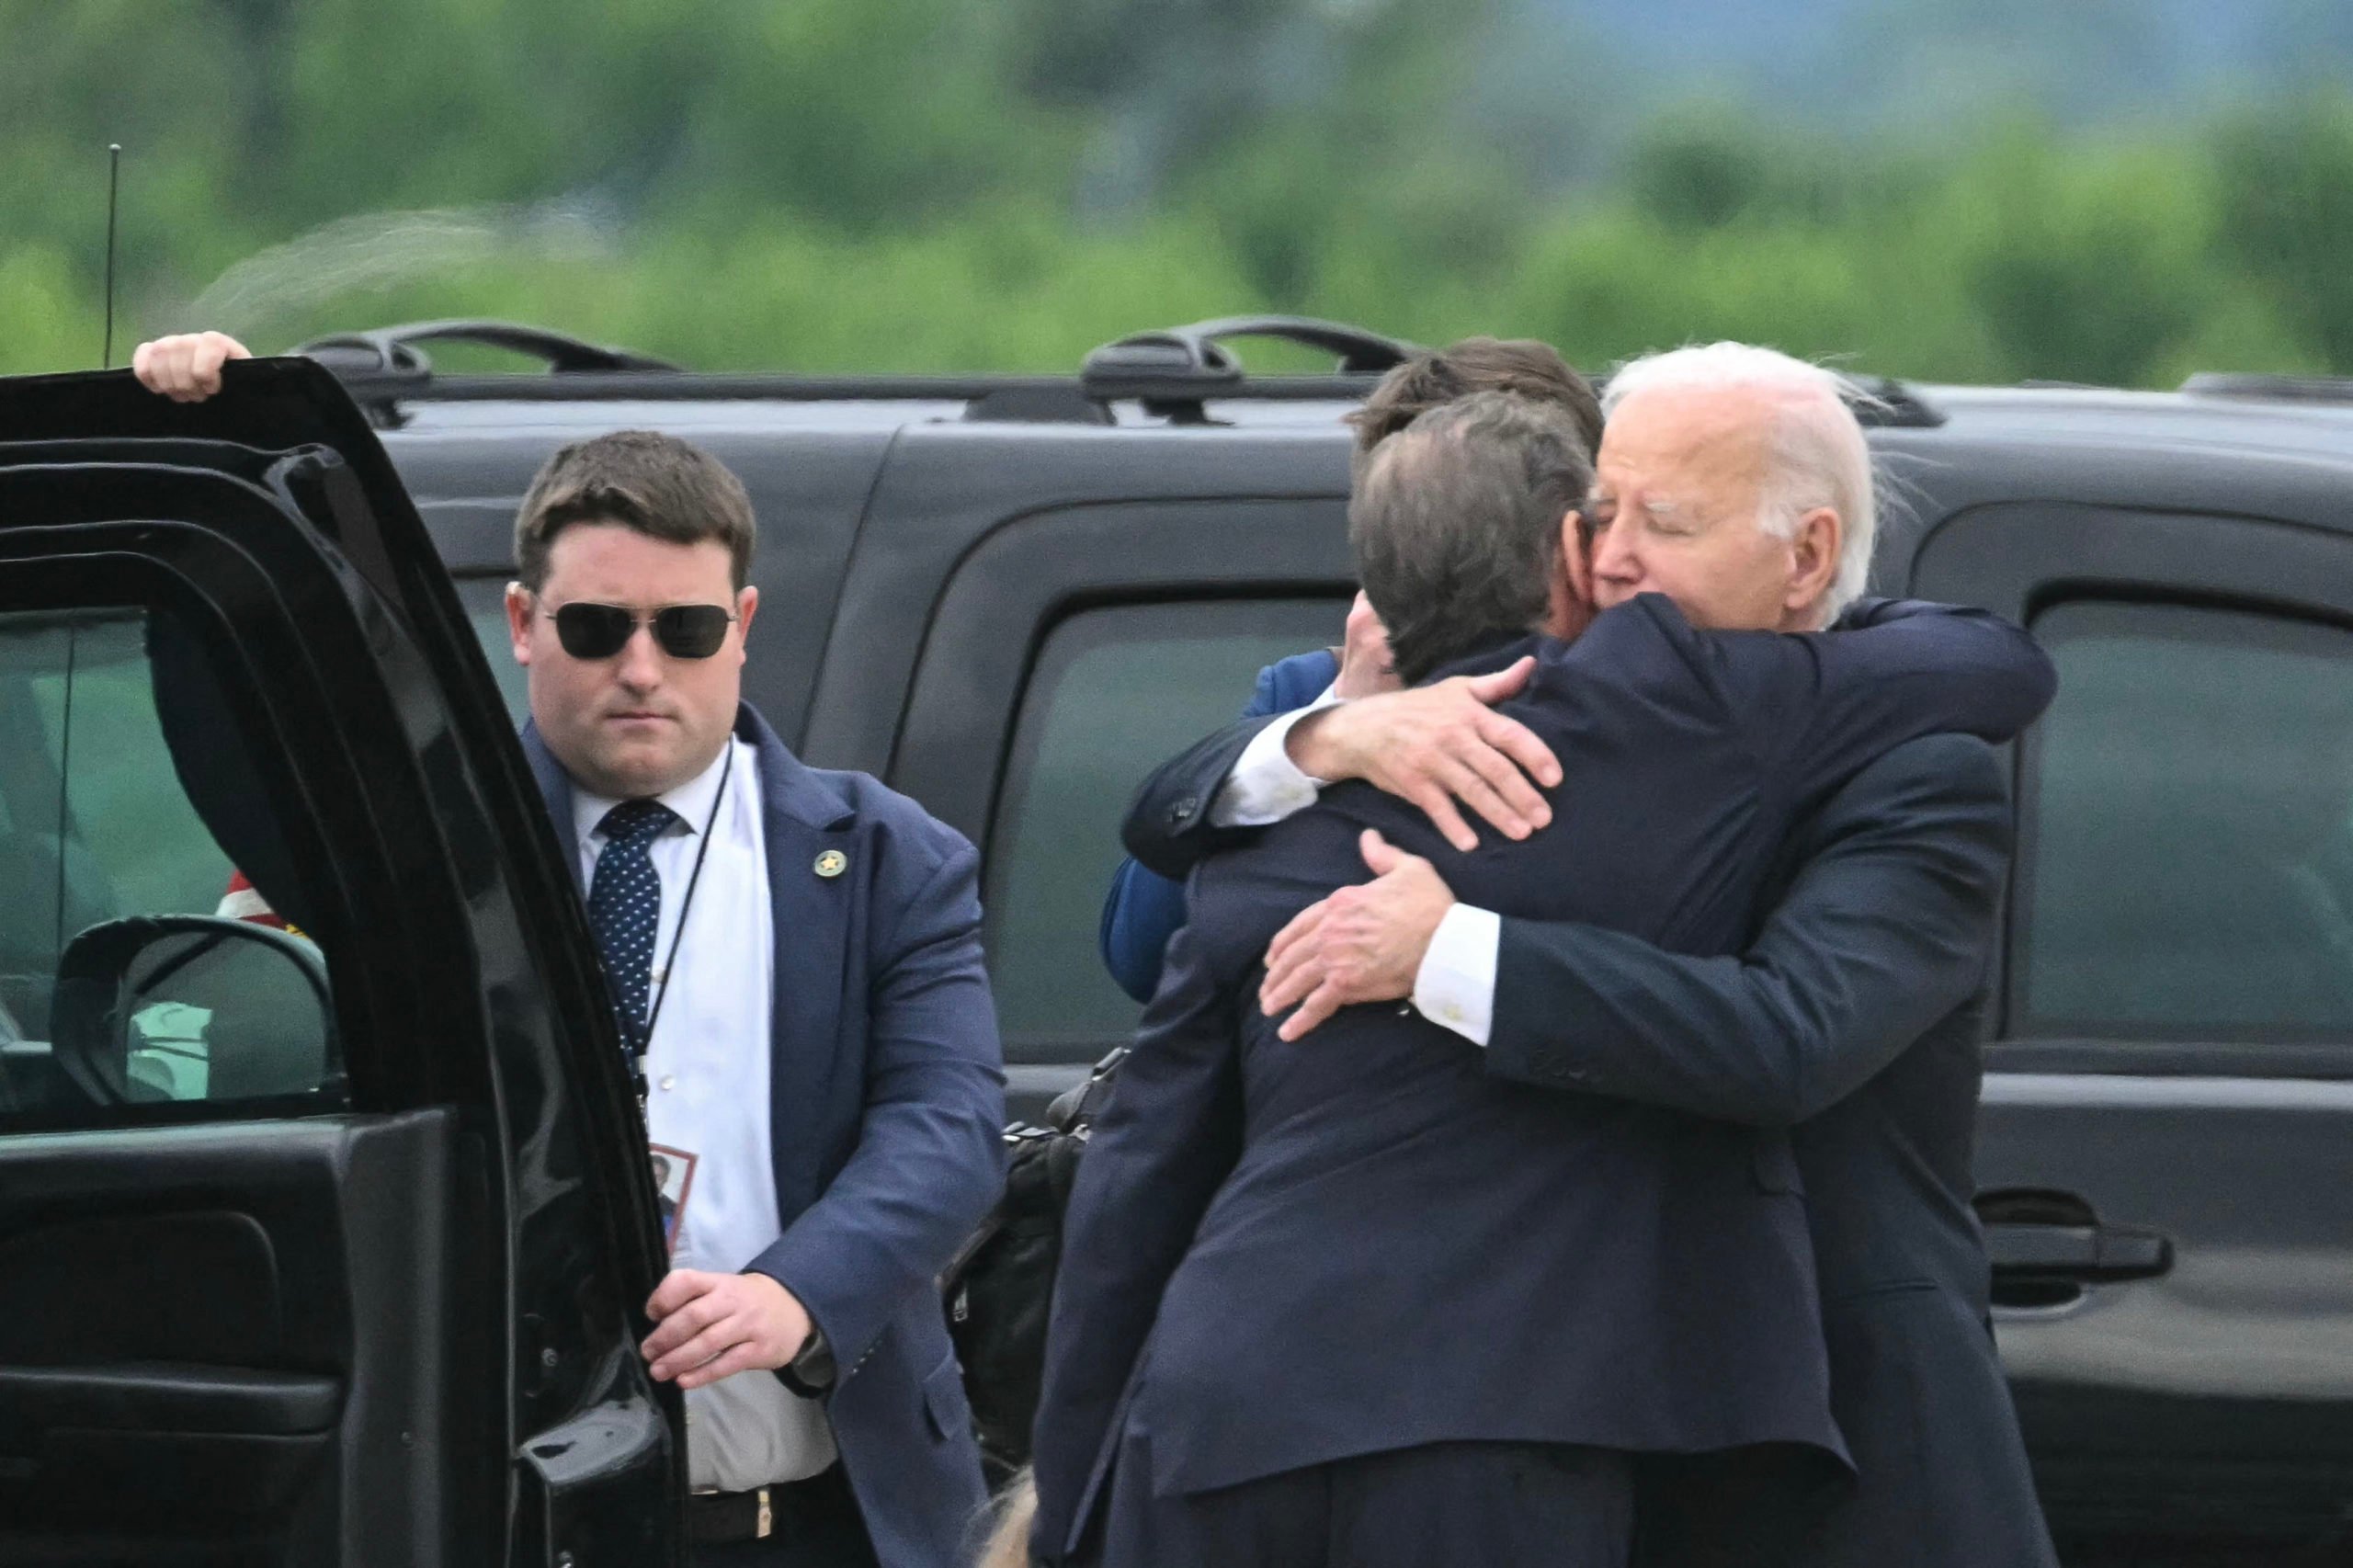 US President Joe Biden hugs his son Hunter Biden upon arrival at Delaware Air National Guard Base in New Castle, Delaware, on June 11, 2024, as he travels to Wilmington, Delaware. A jury found Hunter Biden guilty on June 11 on federal gun charges in a historic first criminal prosecution of the child of a sitting US president. The 54-year-old son of President Joe Biden was convicted on all three of the federal charges facing him, CNN and other US media reported. (Photo by ANDREW CABALLERO-REYNOLDS / AFP) (Photo by ANDREW CABALLERO-REYNOLDS/AFP via Getty Images)